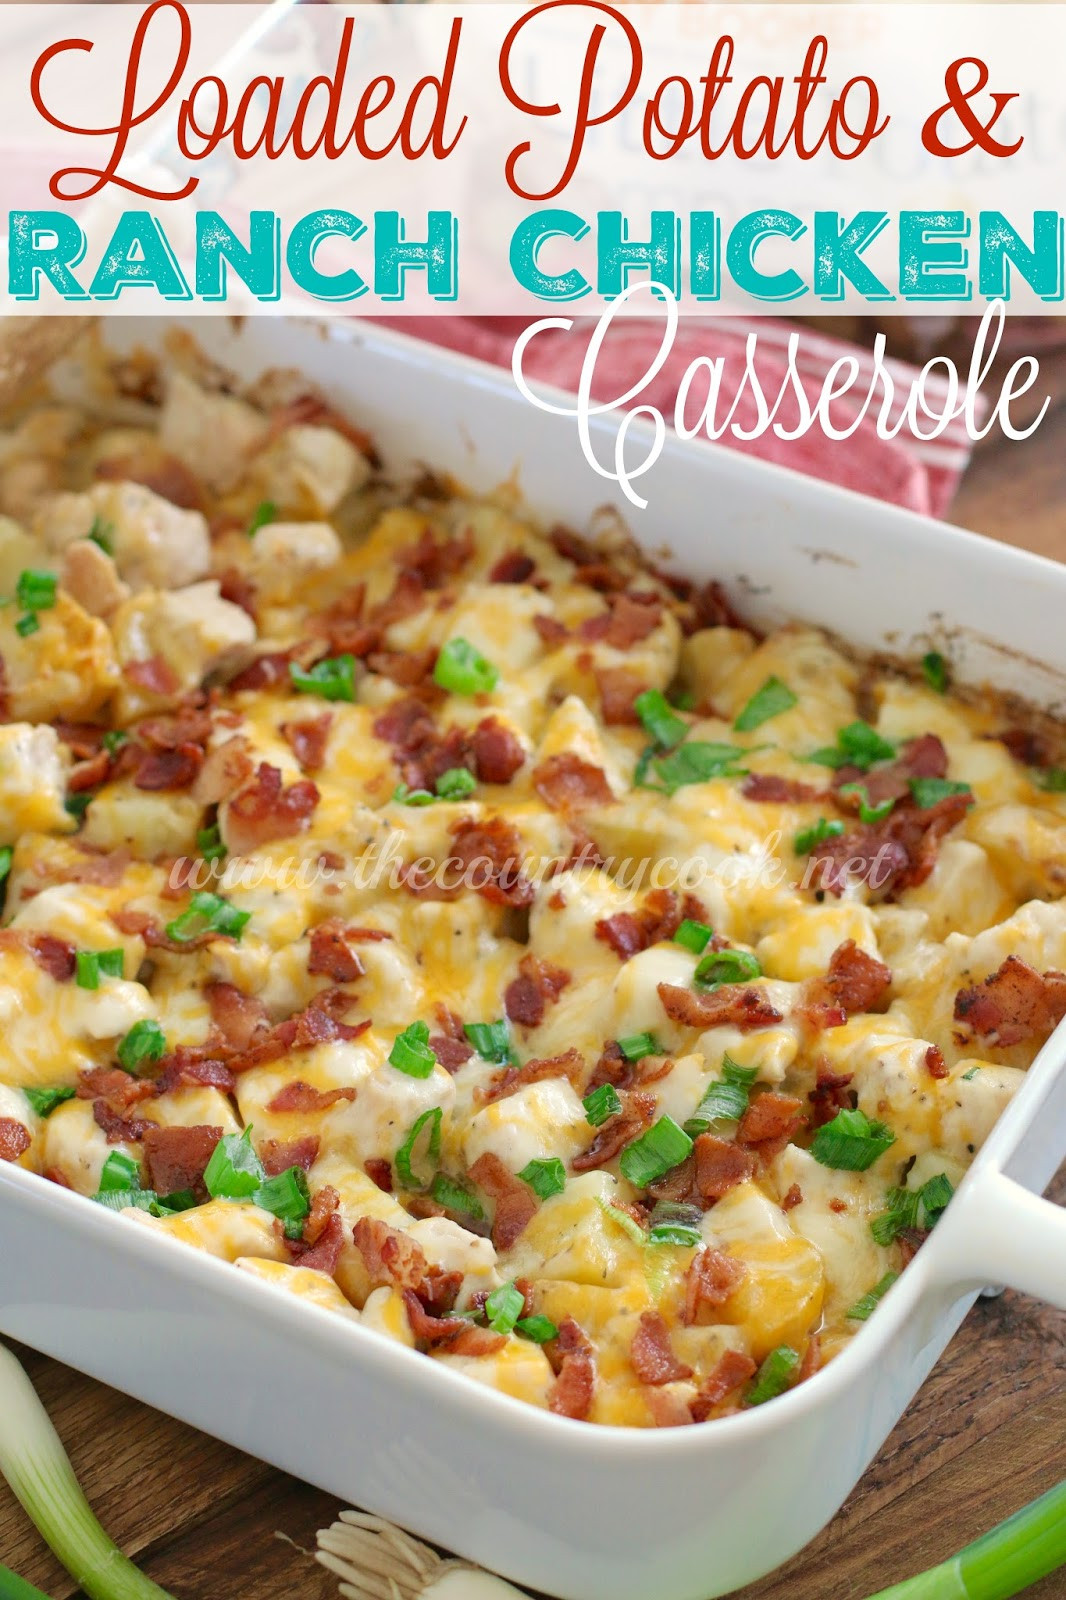 Chicken Ranch Casserole
 Loaded Potato & Ranch Chicken Casserole The Country Cook